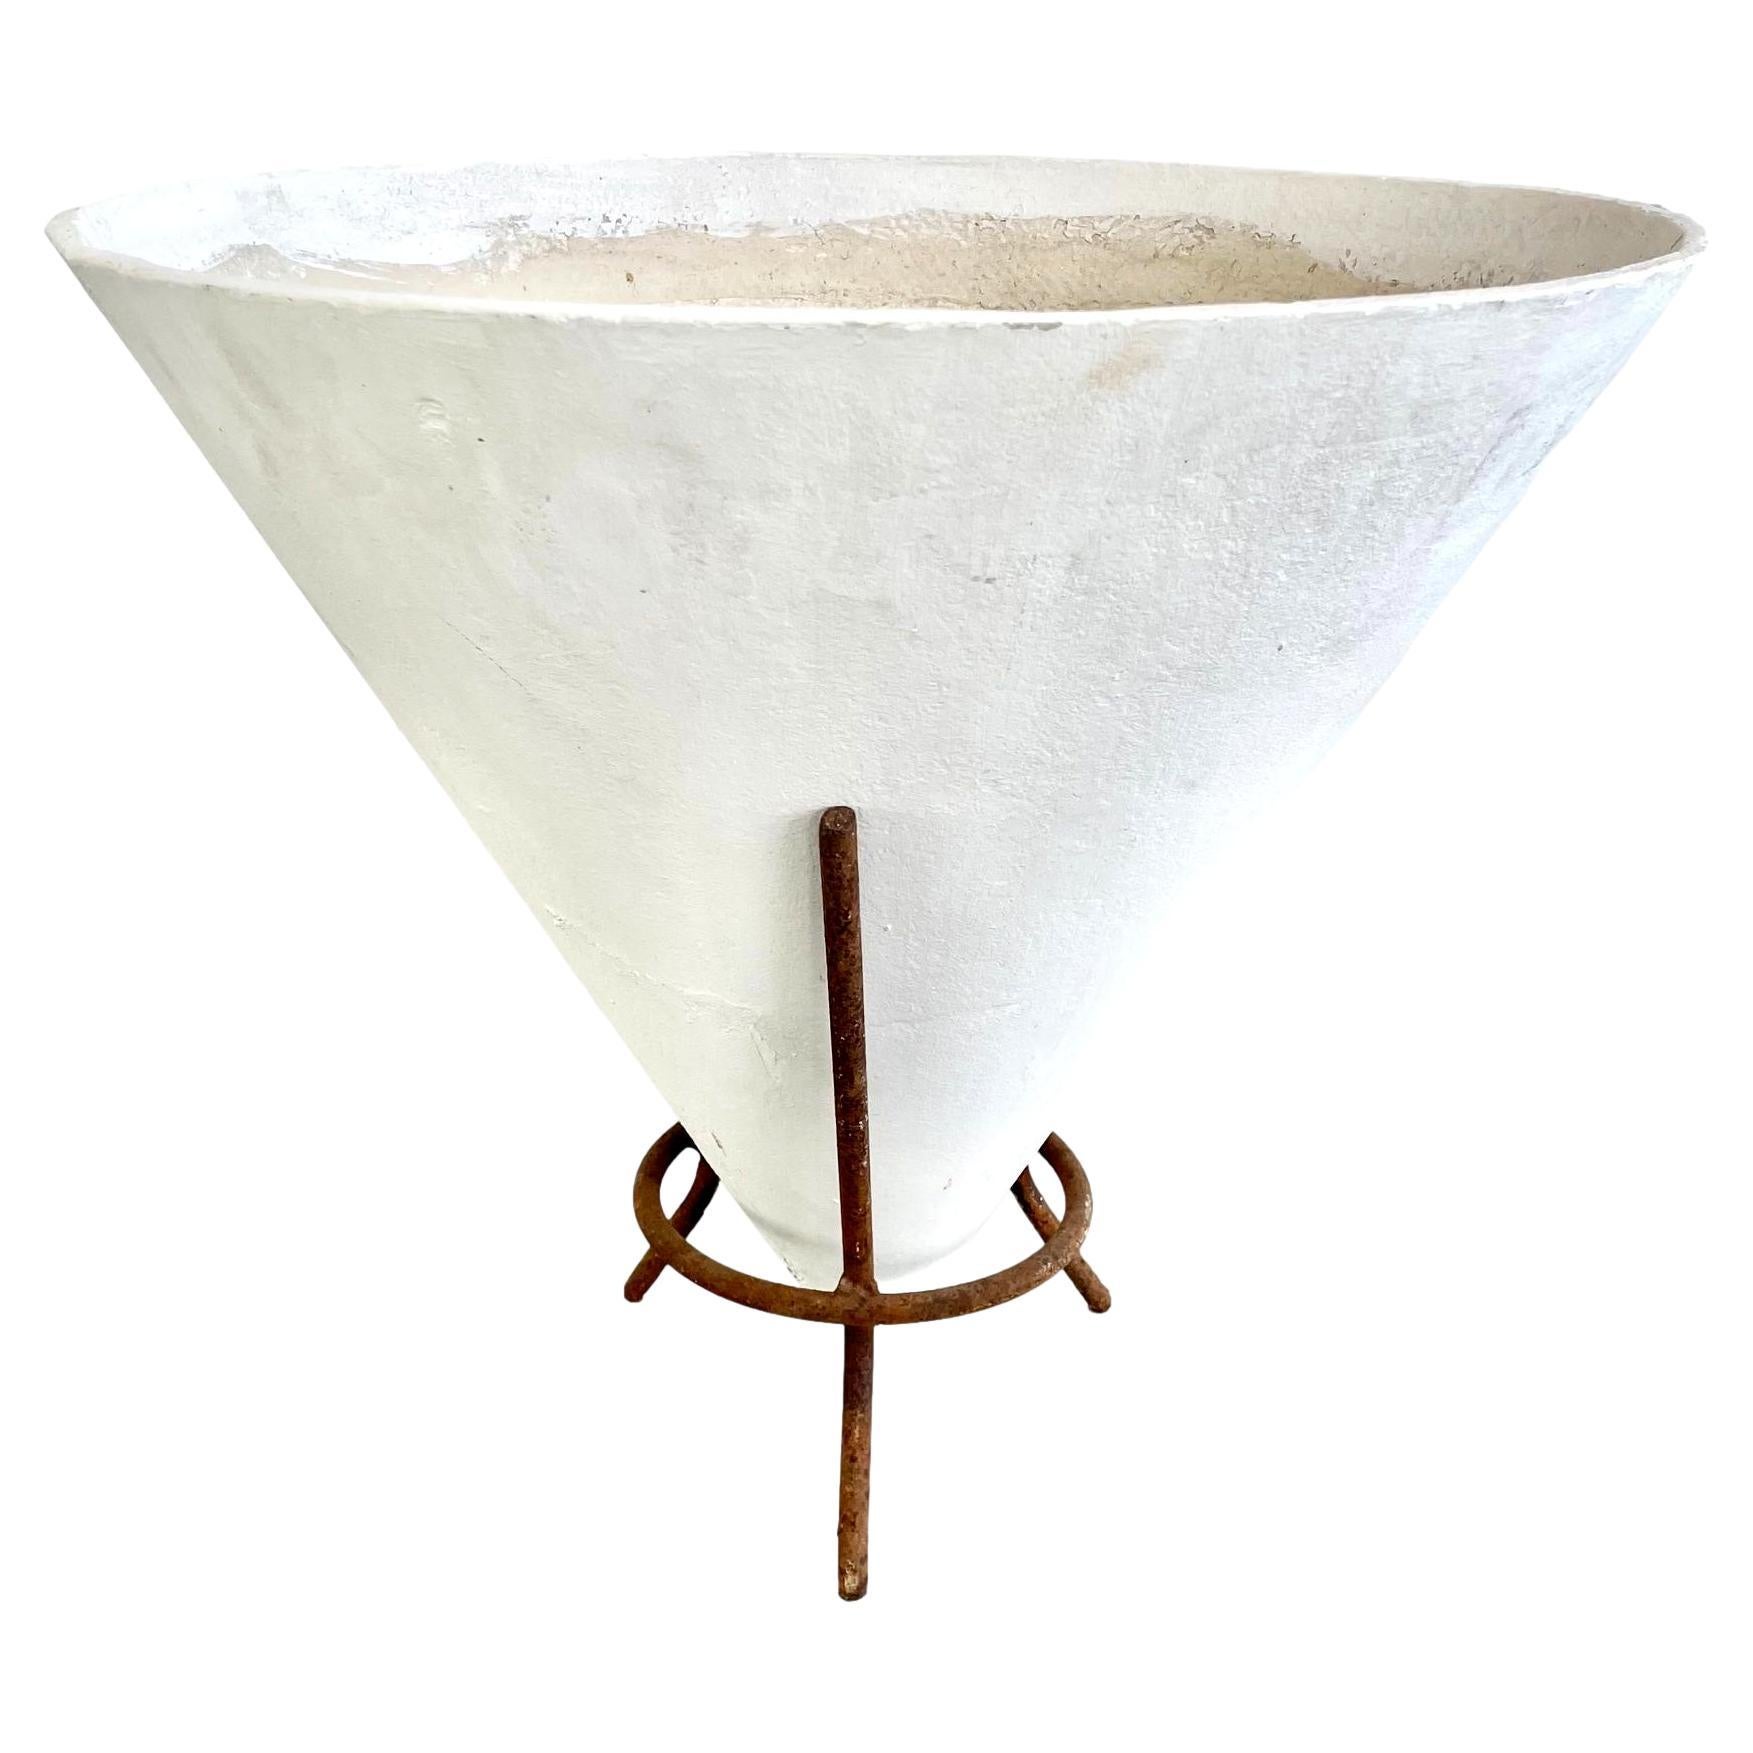 Willy Guhl Concrete Cone Planter on Iron Stand, 1960s Switzerland For Sale